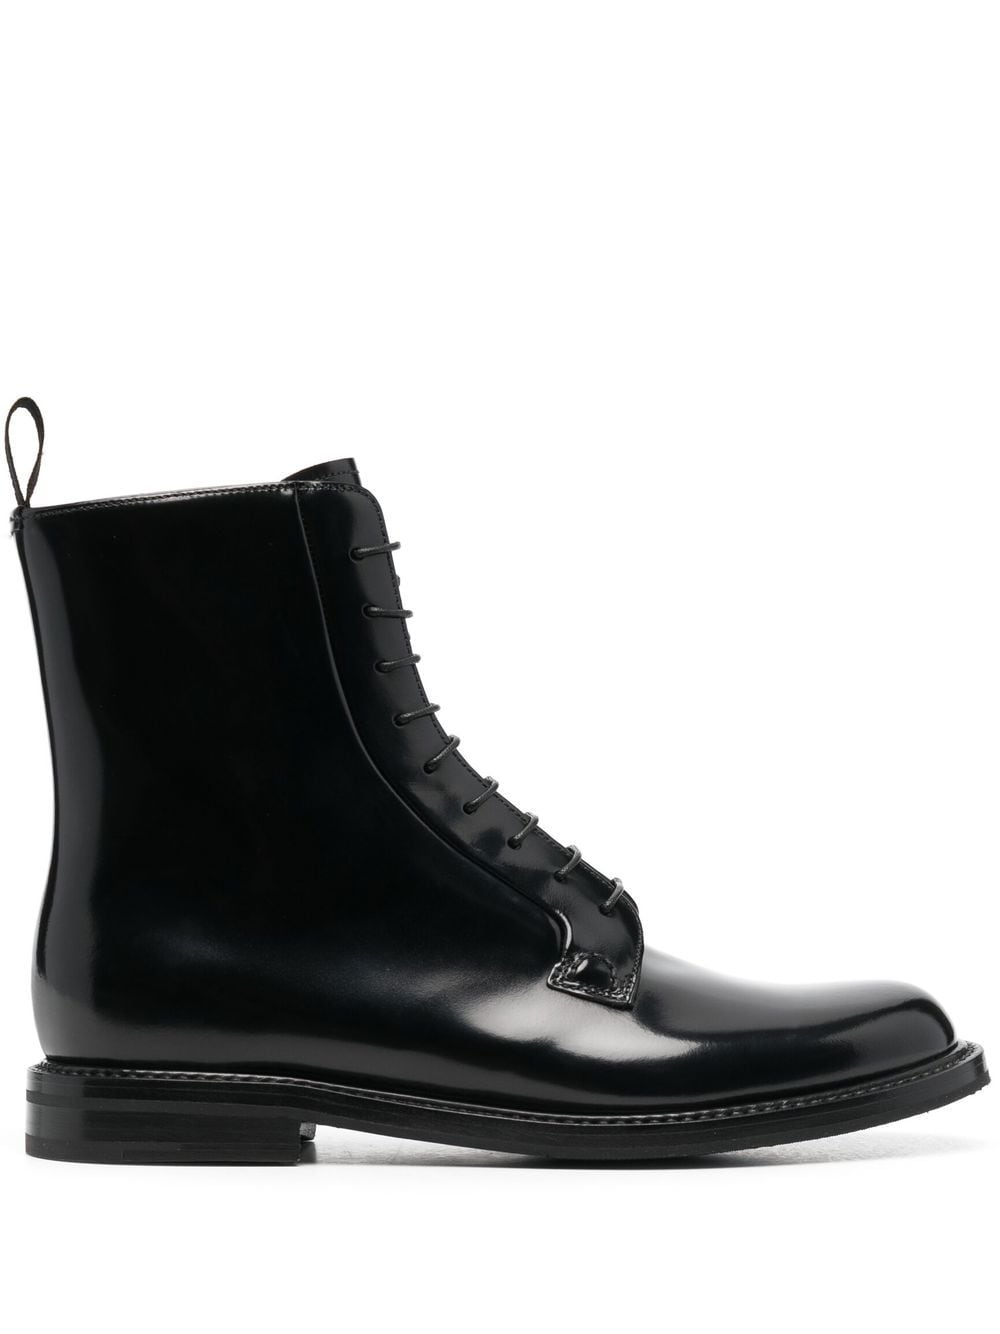 Image 1 of Church's Alexandra lace-up Derby boots